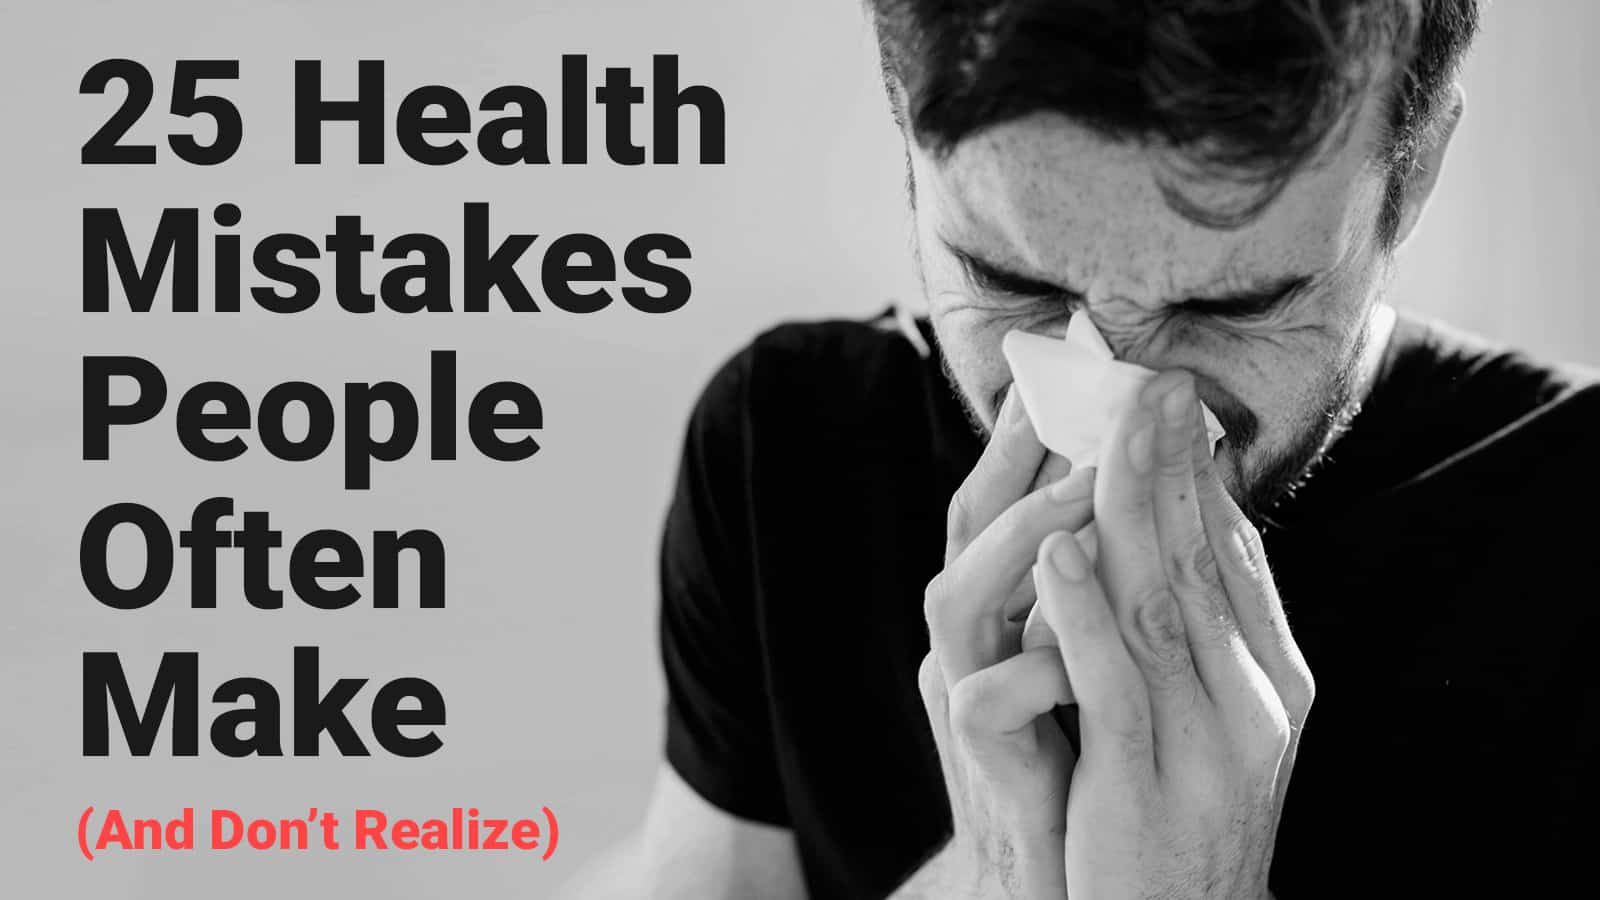 25 Health Mistakes People Often Make (And Don’t Realize)